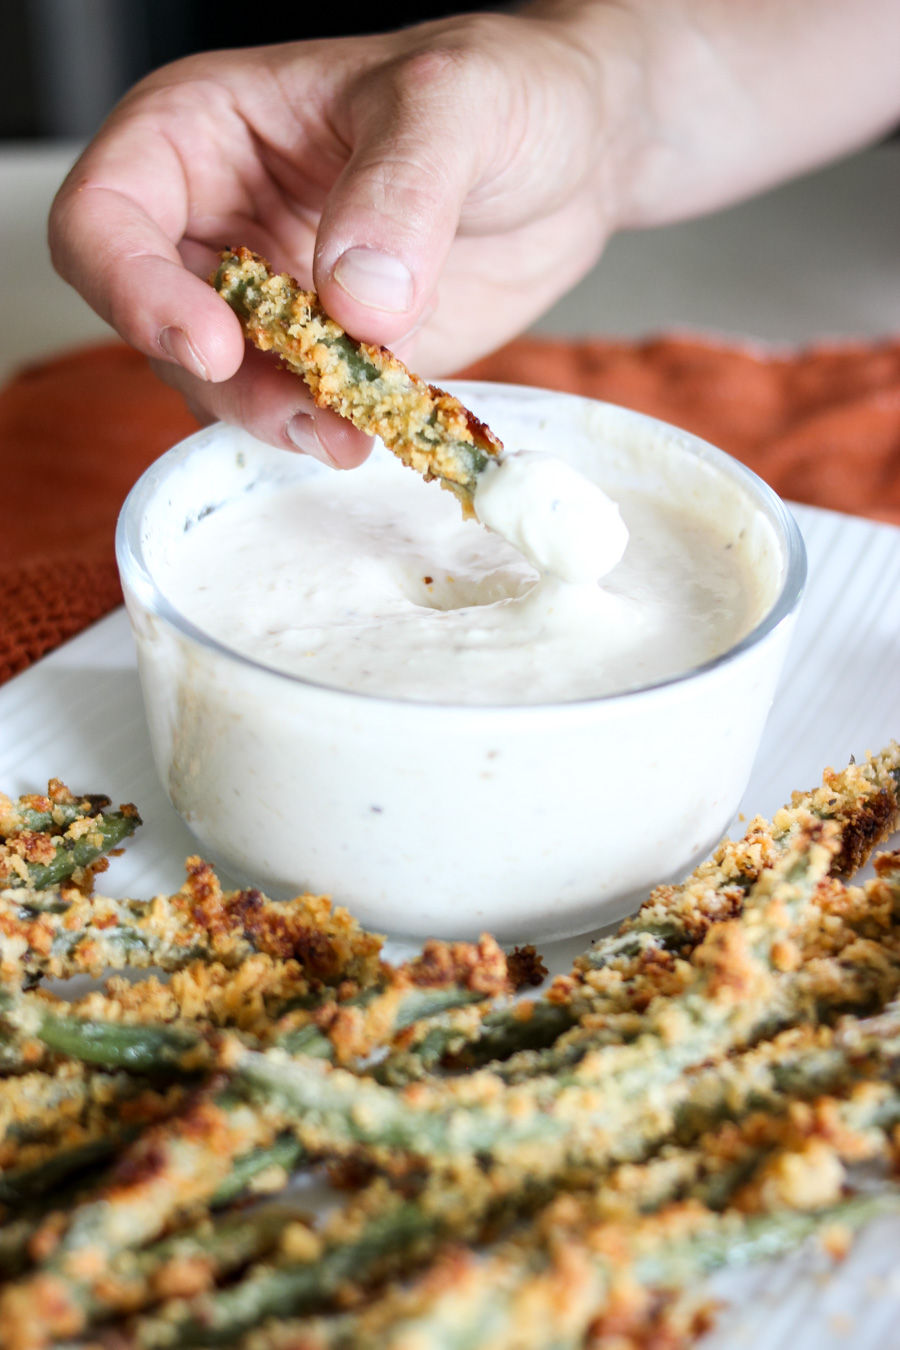 Baked Green Bean Fries with Zesty Horseradish Dipping Sauce